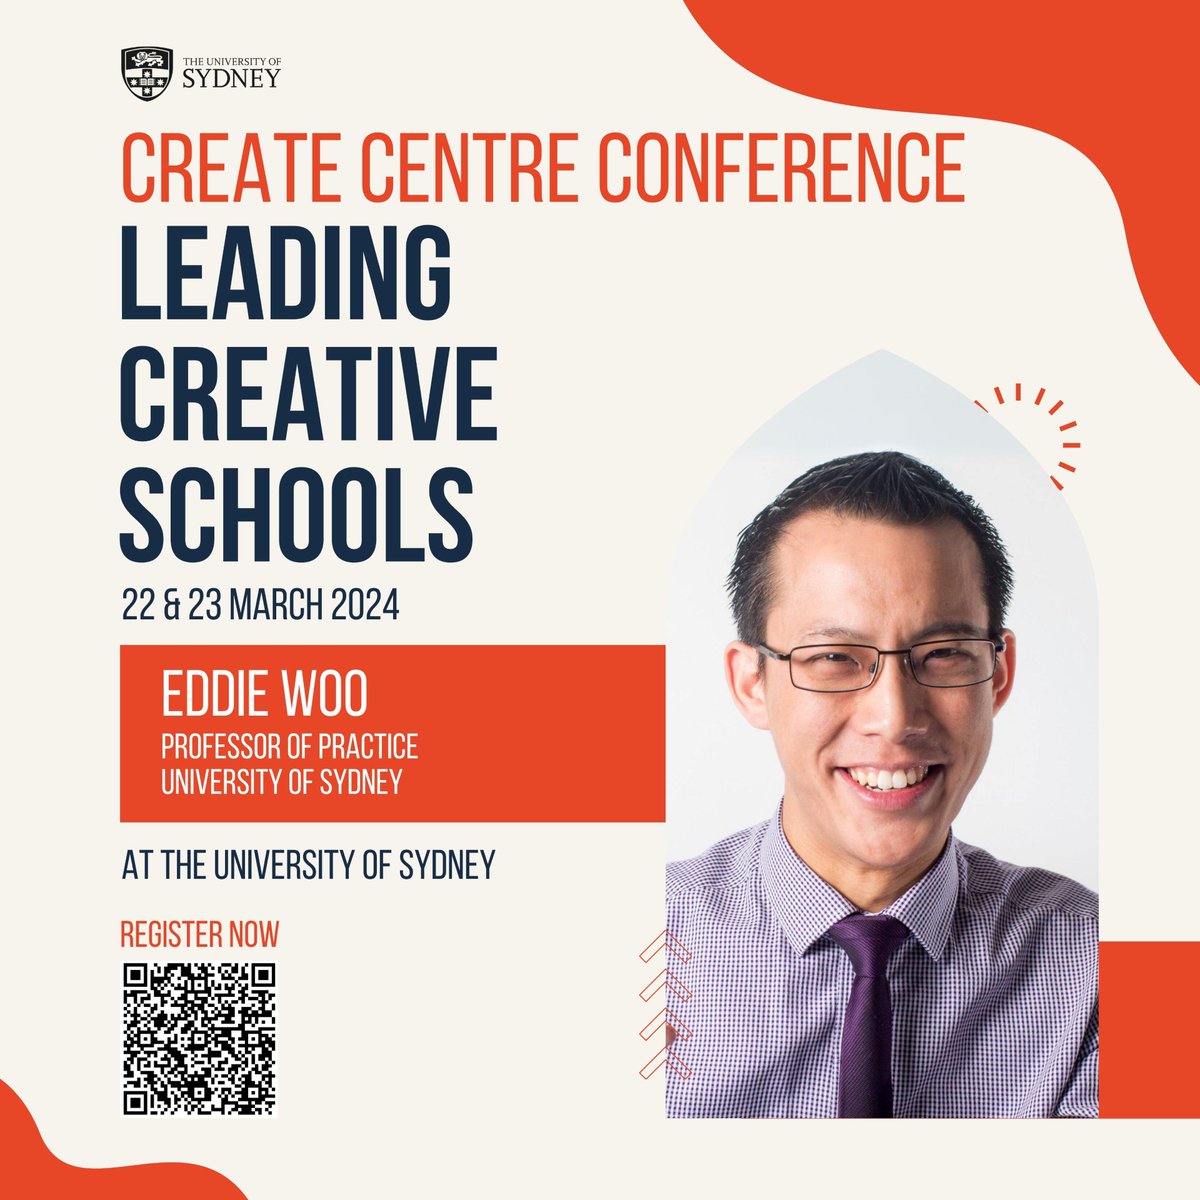 Our Leading Creative Schools conference is your chance to hear @misterwootube on finding #creative #connections 22 & 23 March with @USyd_SSESW showing #creativity belongs in all kind of #learning. Register here: pay.sydney.edu.au/V96/booking?ud…